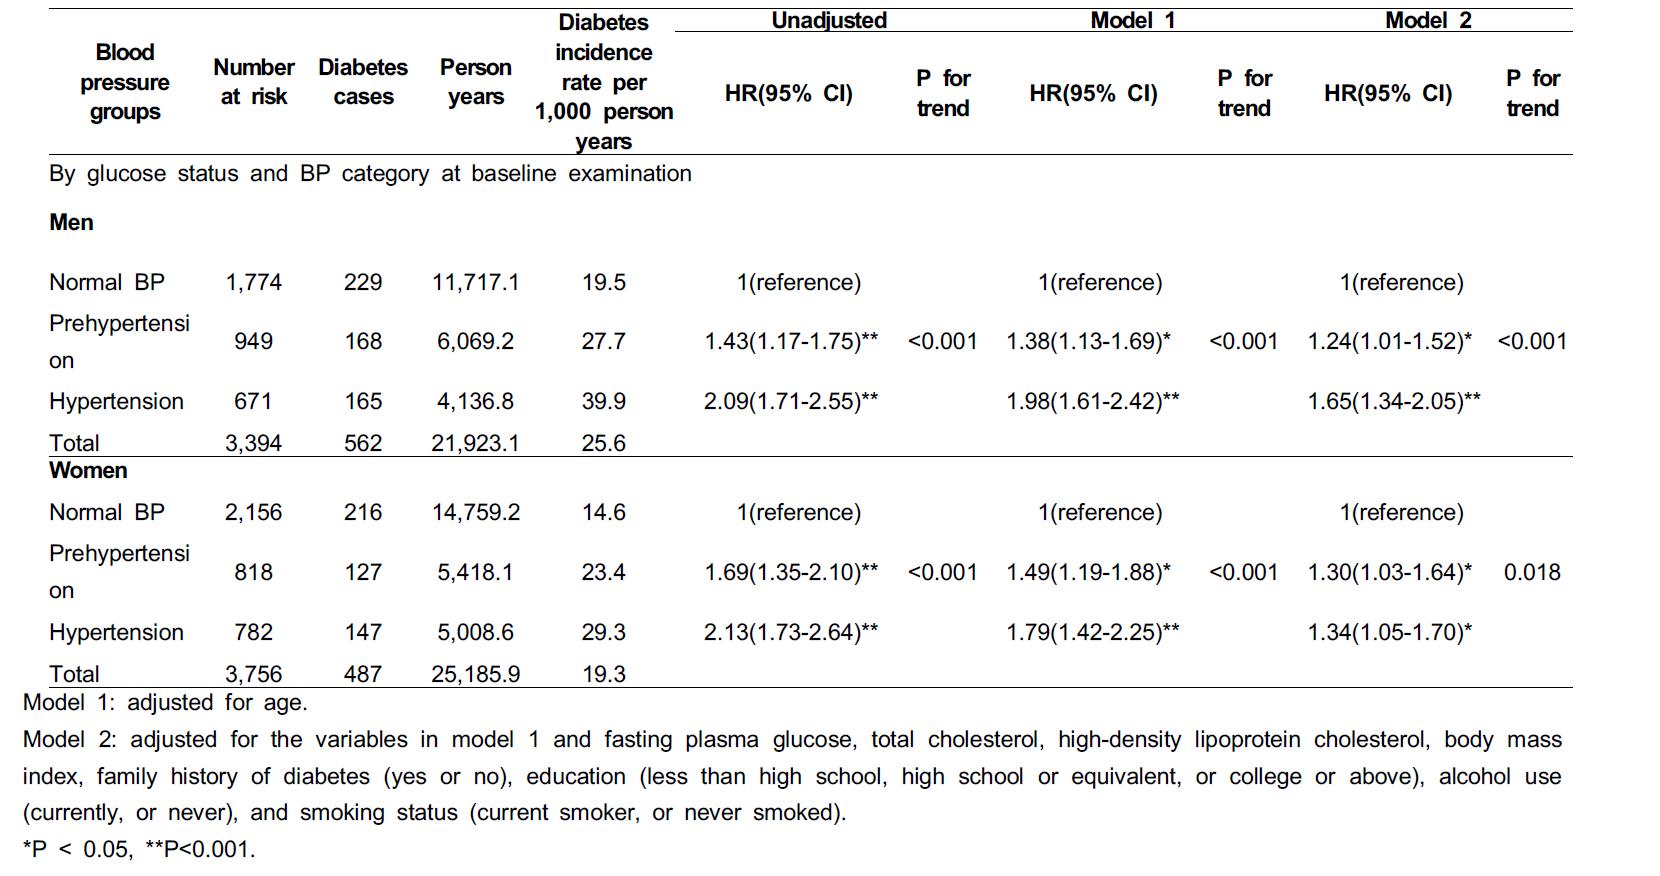 Sex-stratified risk of incident diabetes according to baseline blood pressure during 8 years of follow-up